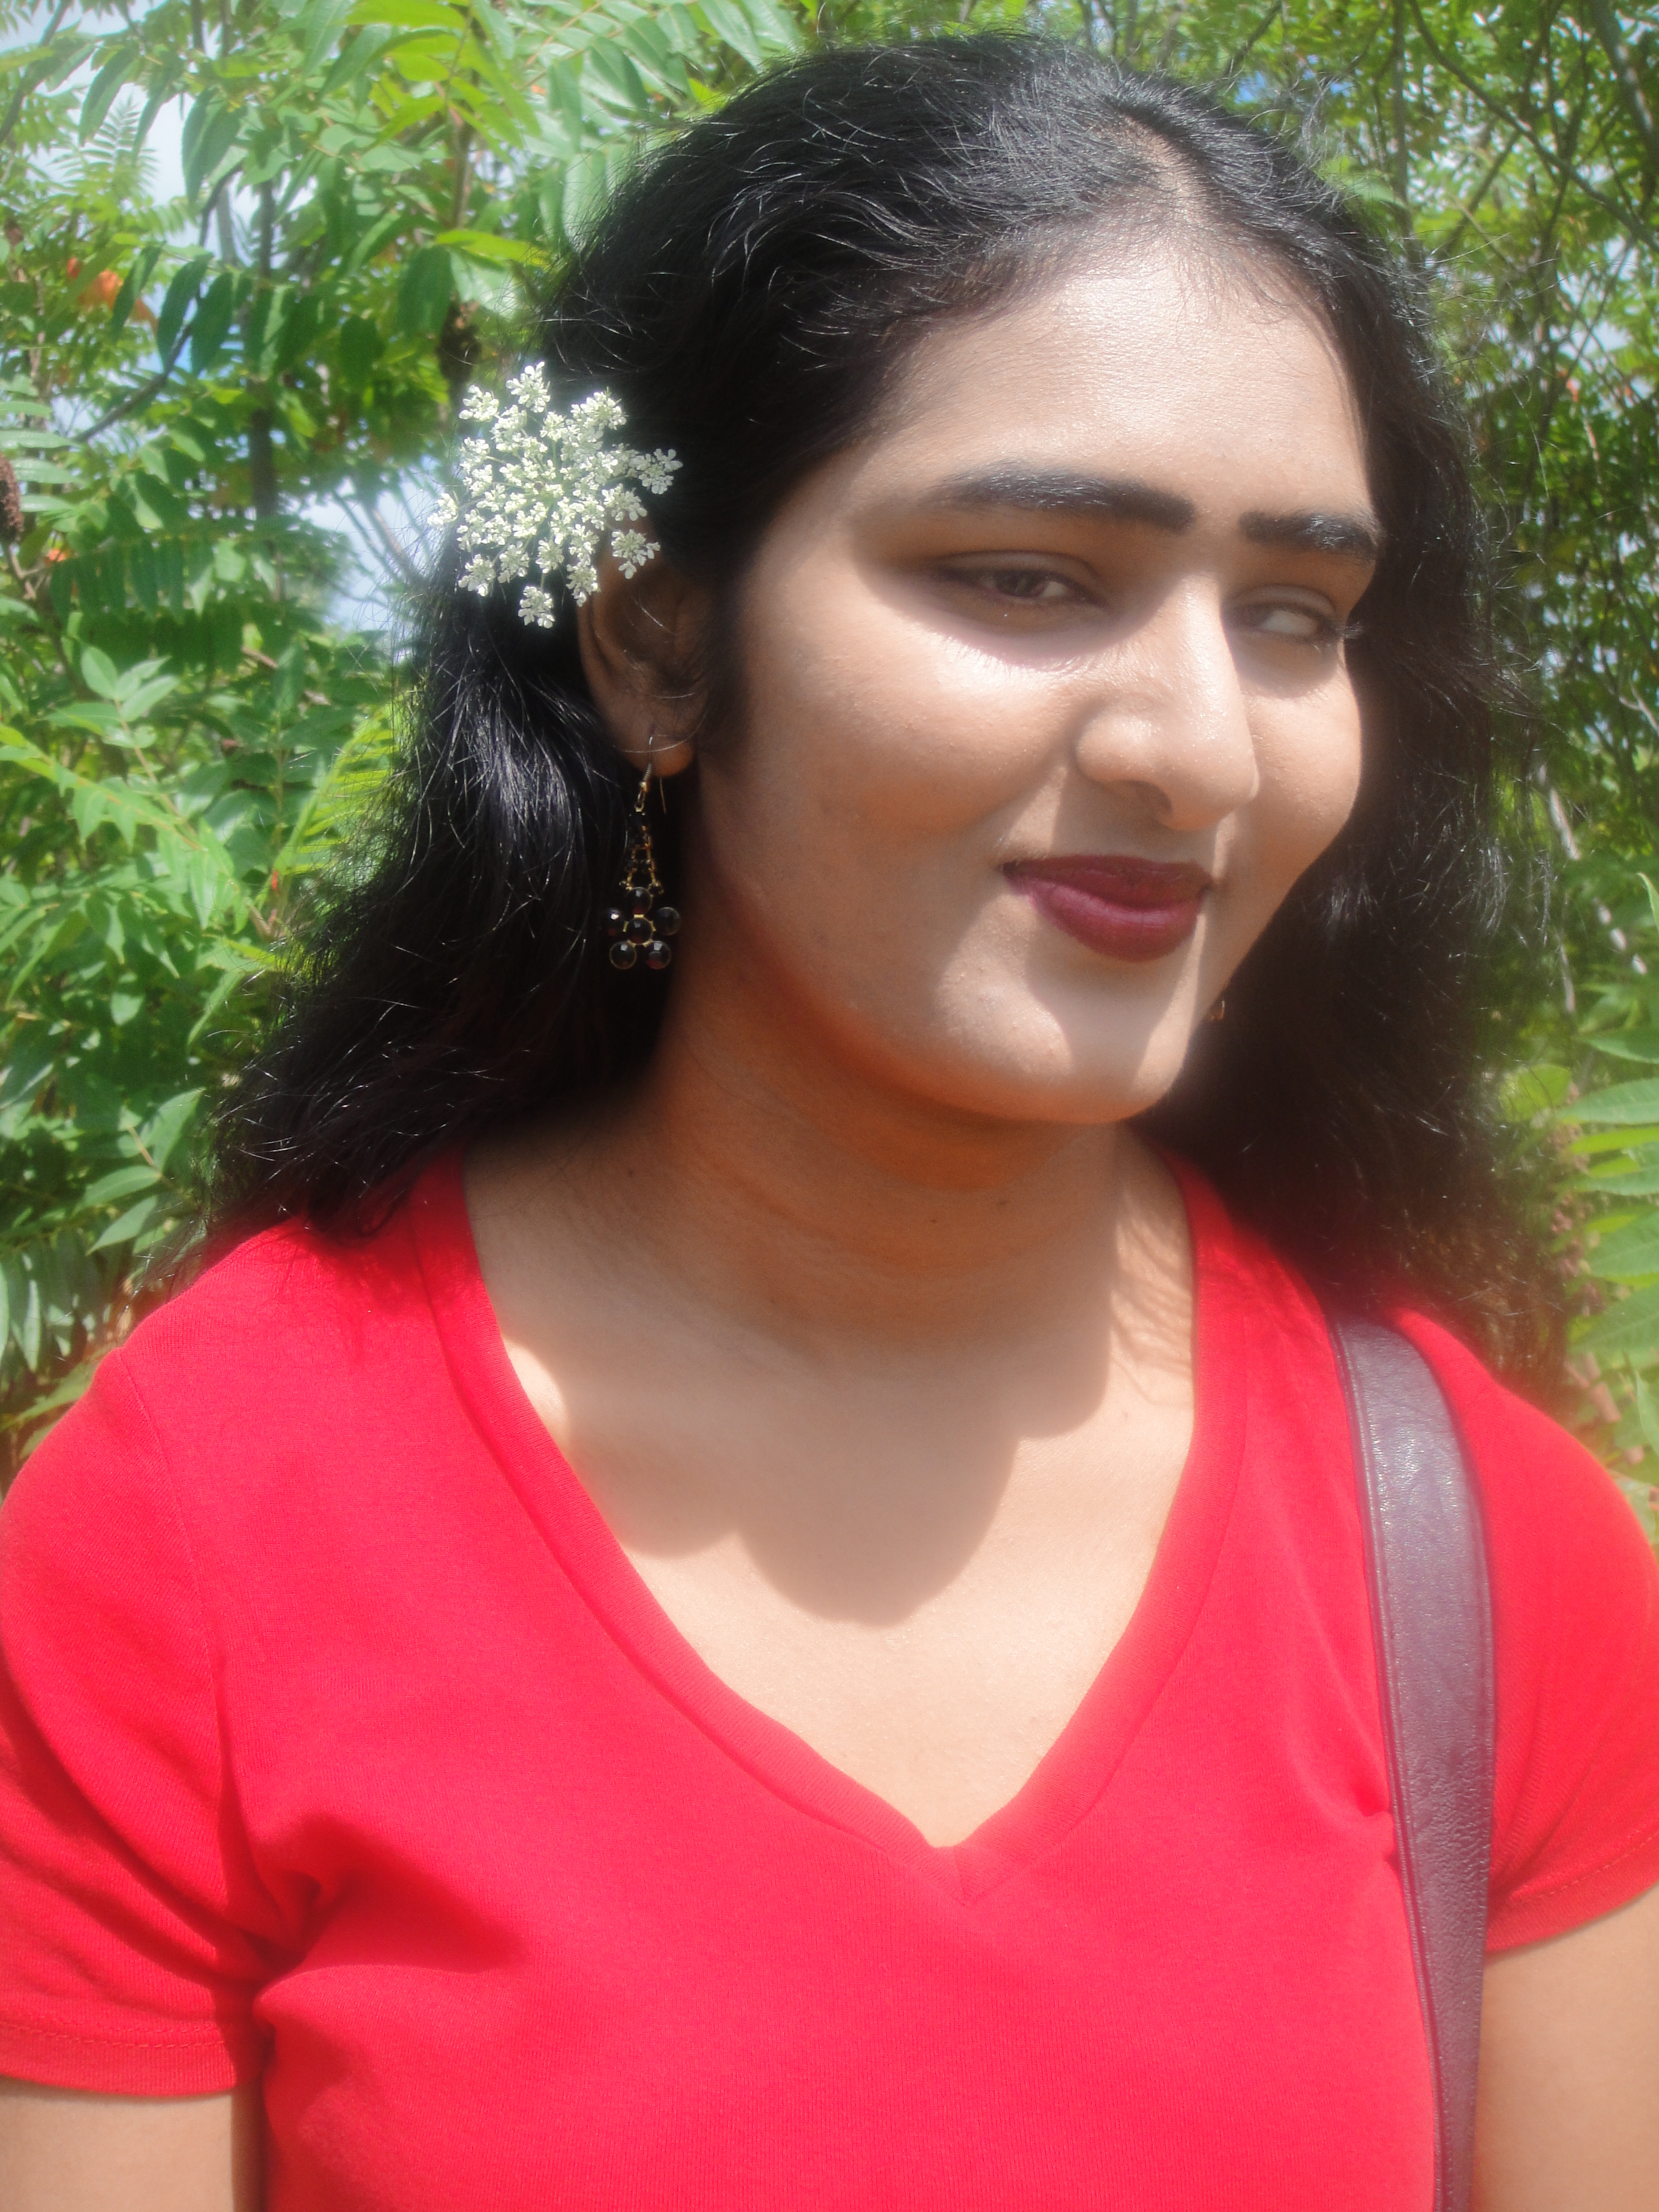  Headshot of Kamini, who is smiling and wearing a red v-neck top and a white flower in her hair.